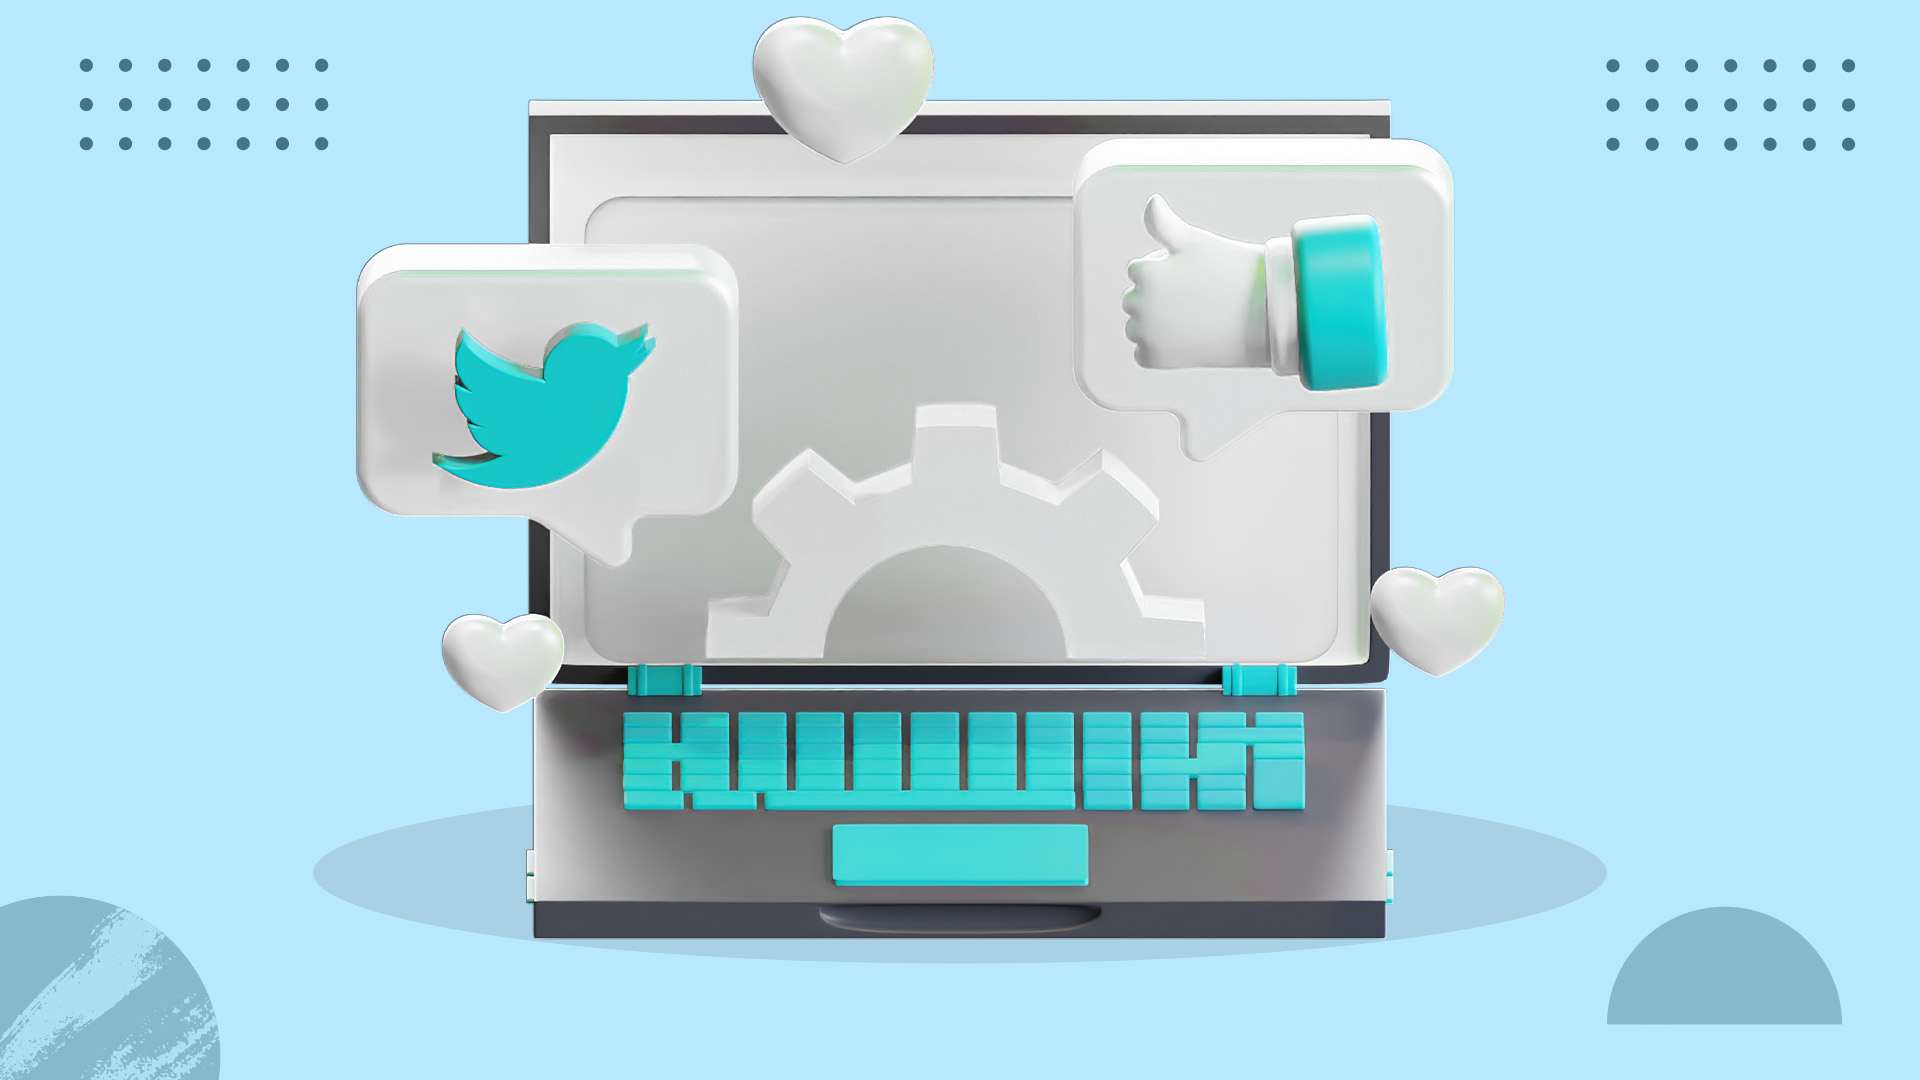 30 Twitter tools for marketing